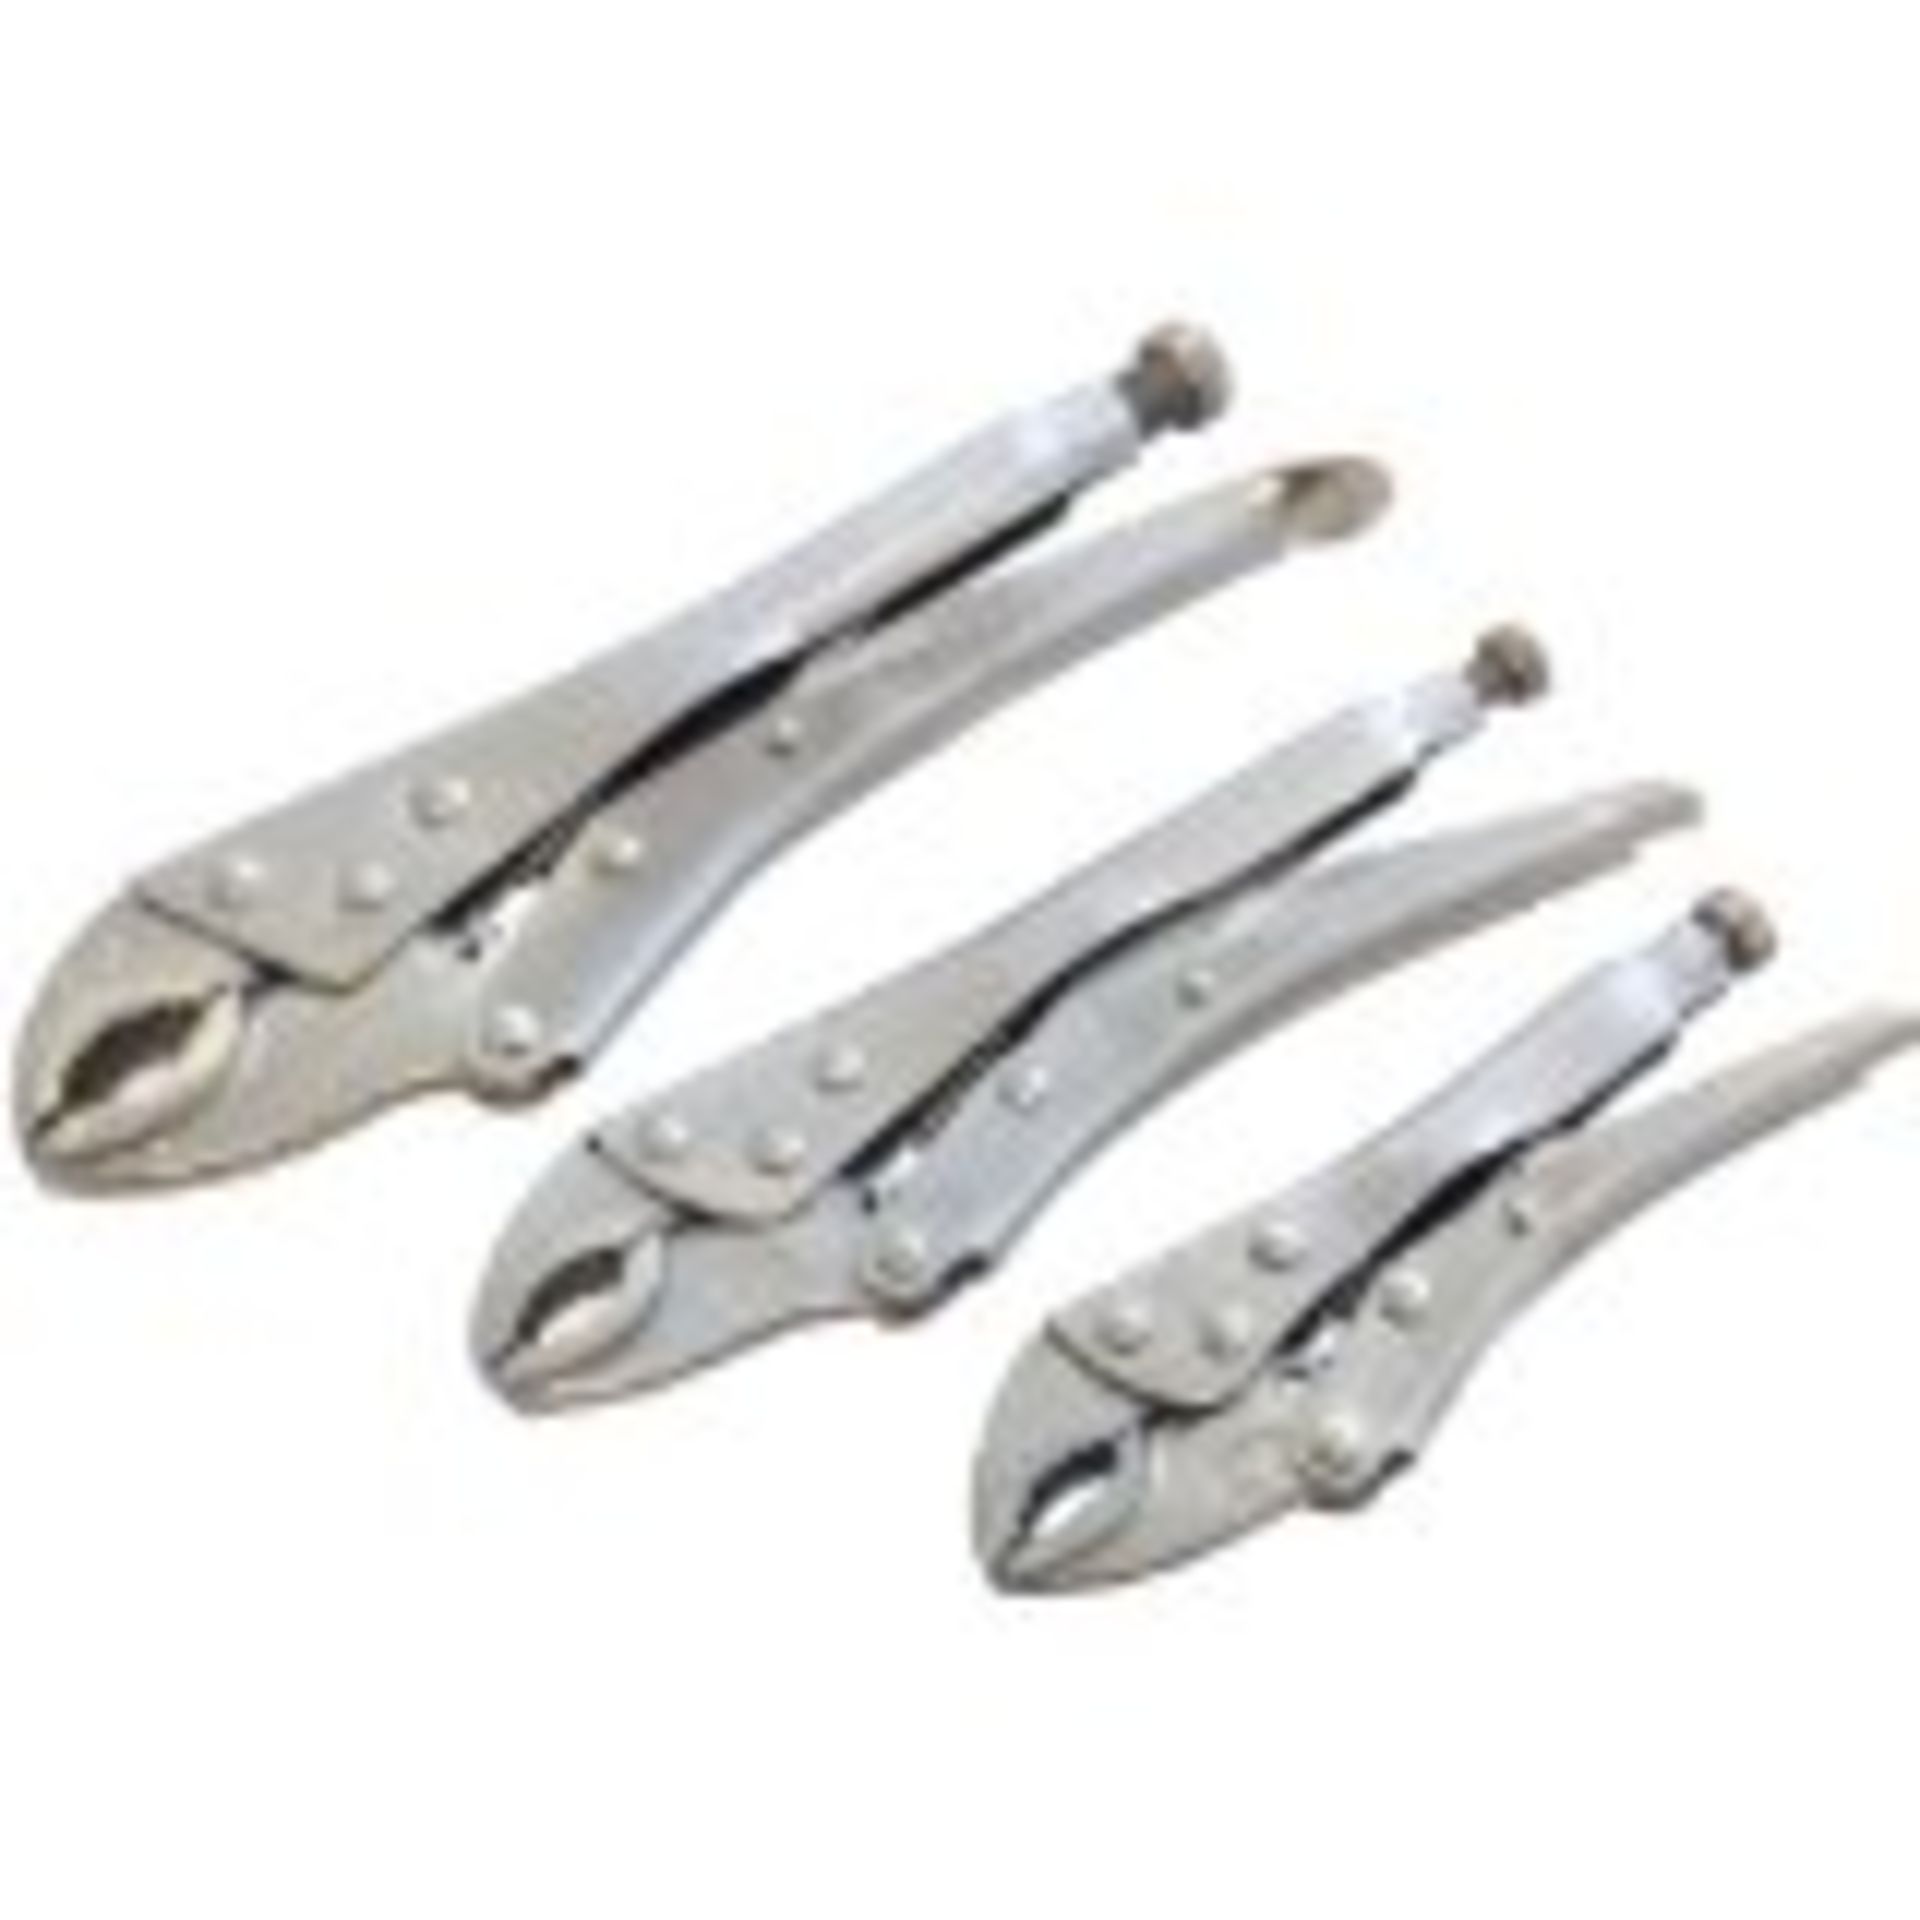 V *TRADE QTY* Brand New Three Piece Locking Plier Set X 10 YOUR BID PRICE TO BE MULTIPLIED BY TEN